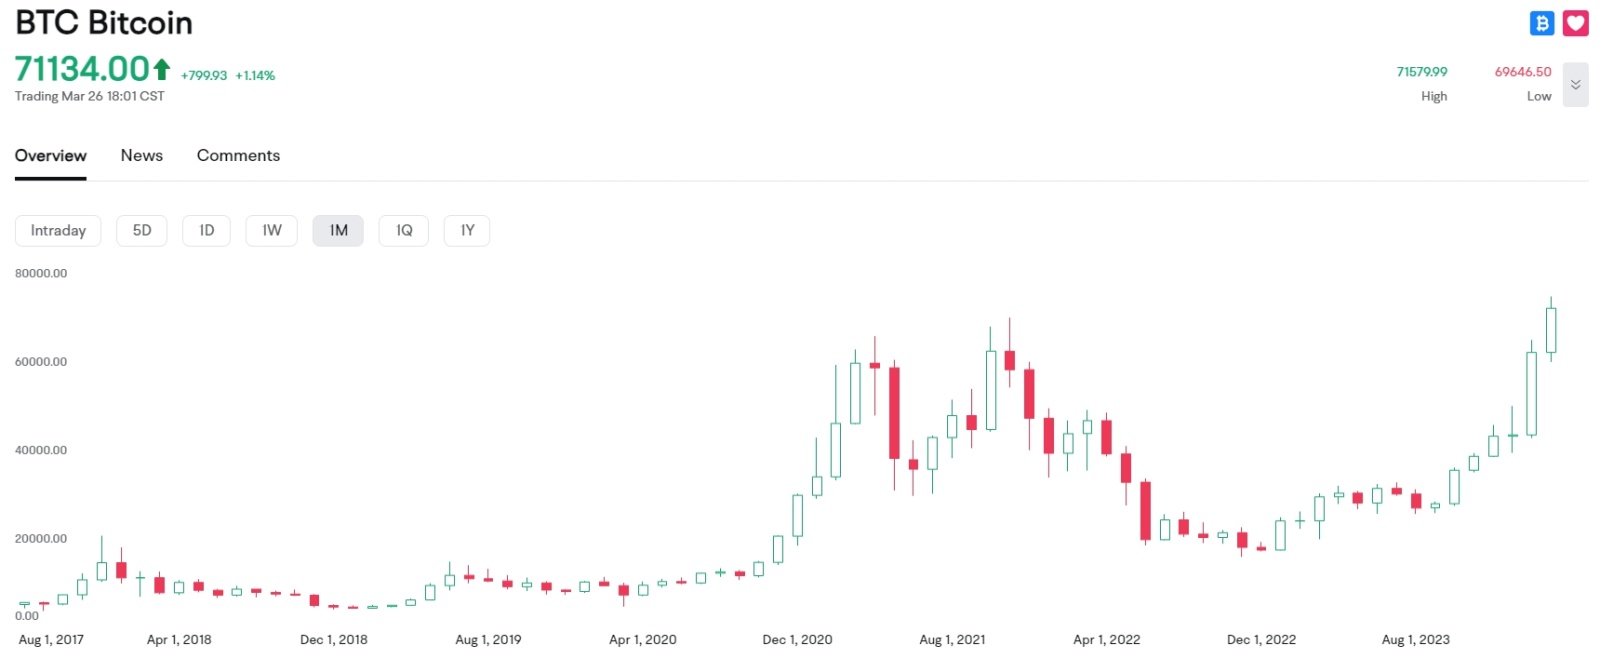 Bitcoin Is Back Above $71,000. What Developments Are Worth Paying Attention To?